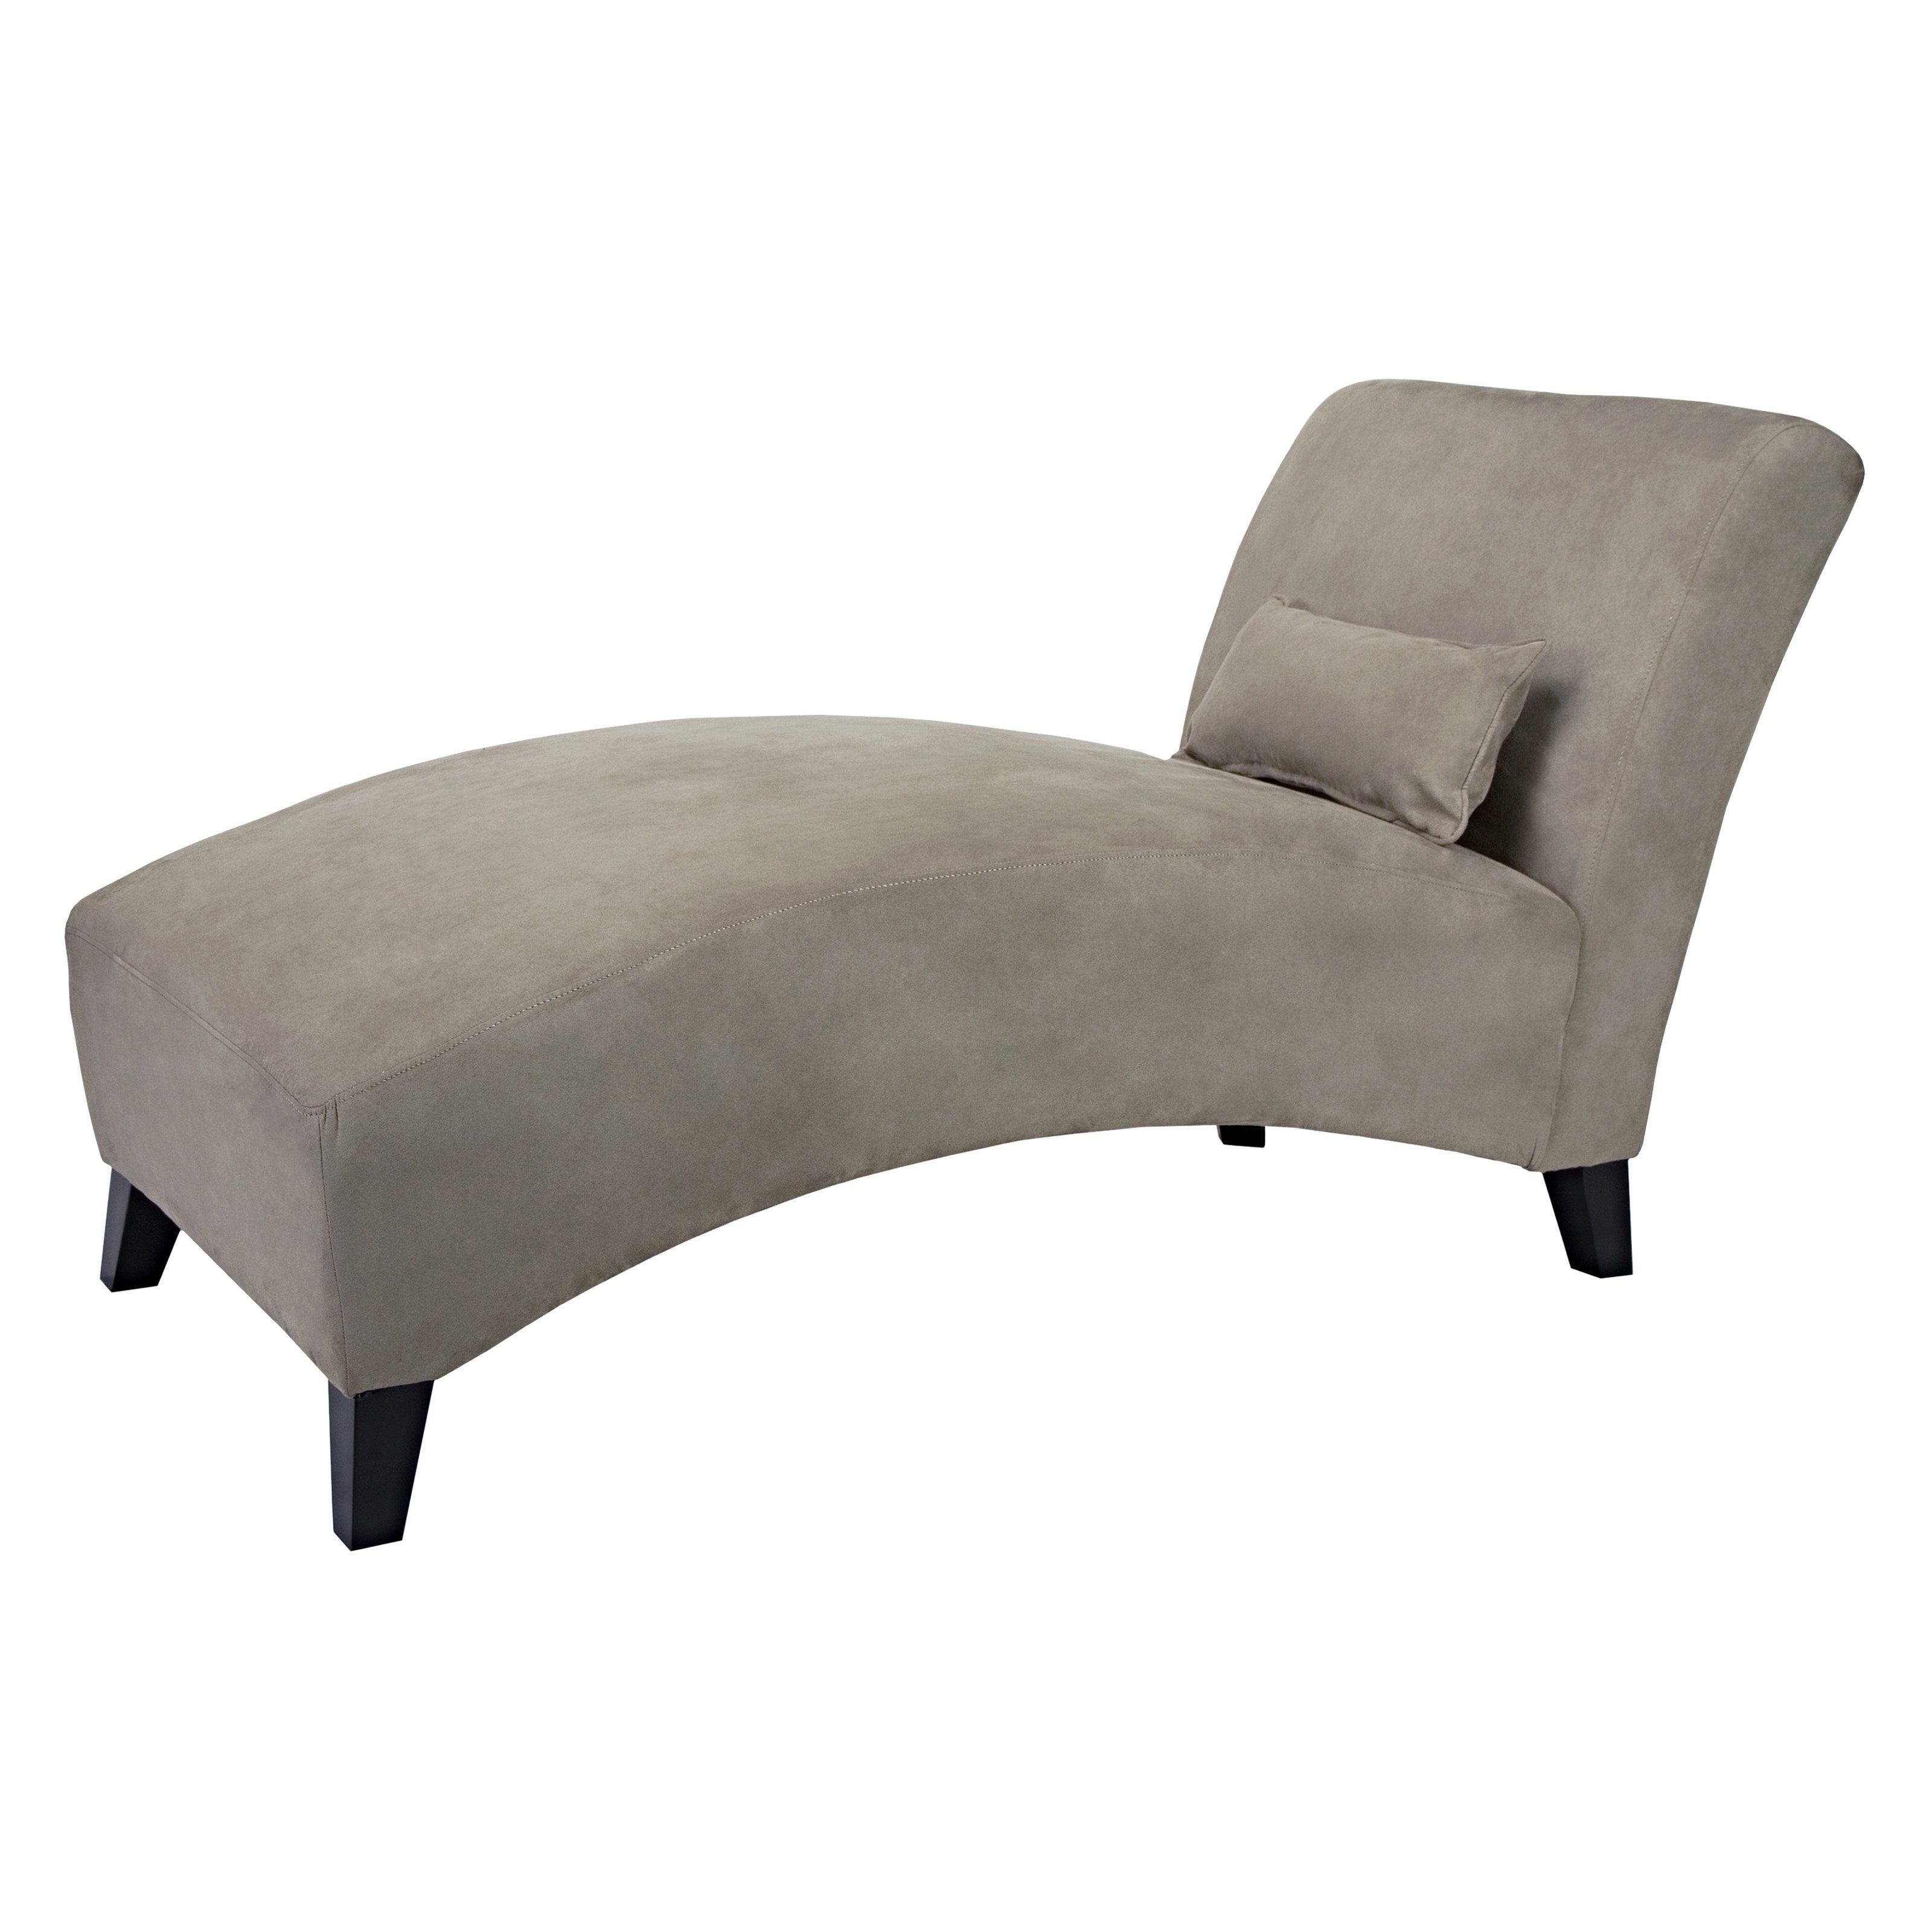 Trendy Decorating: Indoor Chaise Lounge Slipcovers And Leather Chaise Inside Chaise Lounge Slipcovers (View 2 of 15)